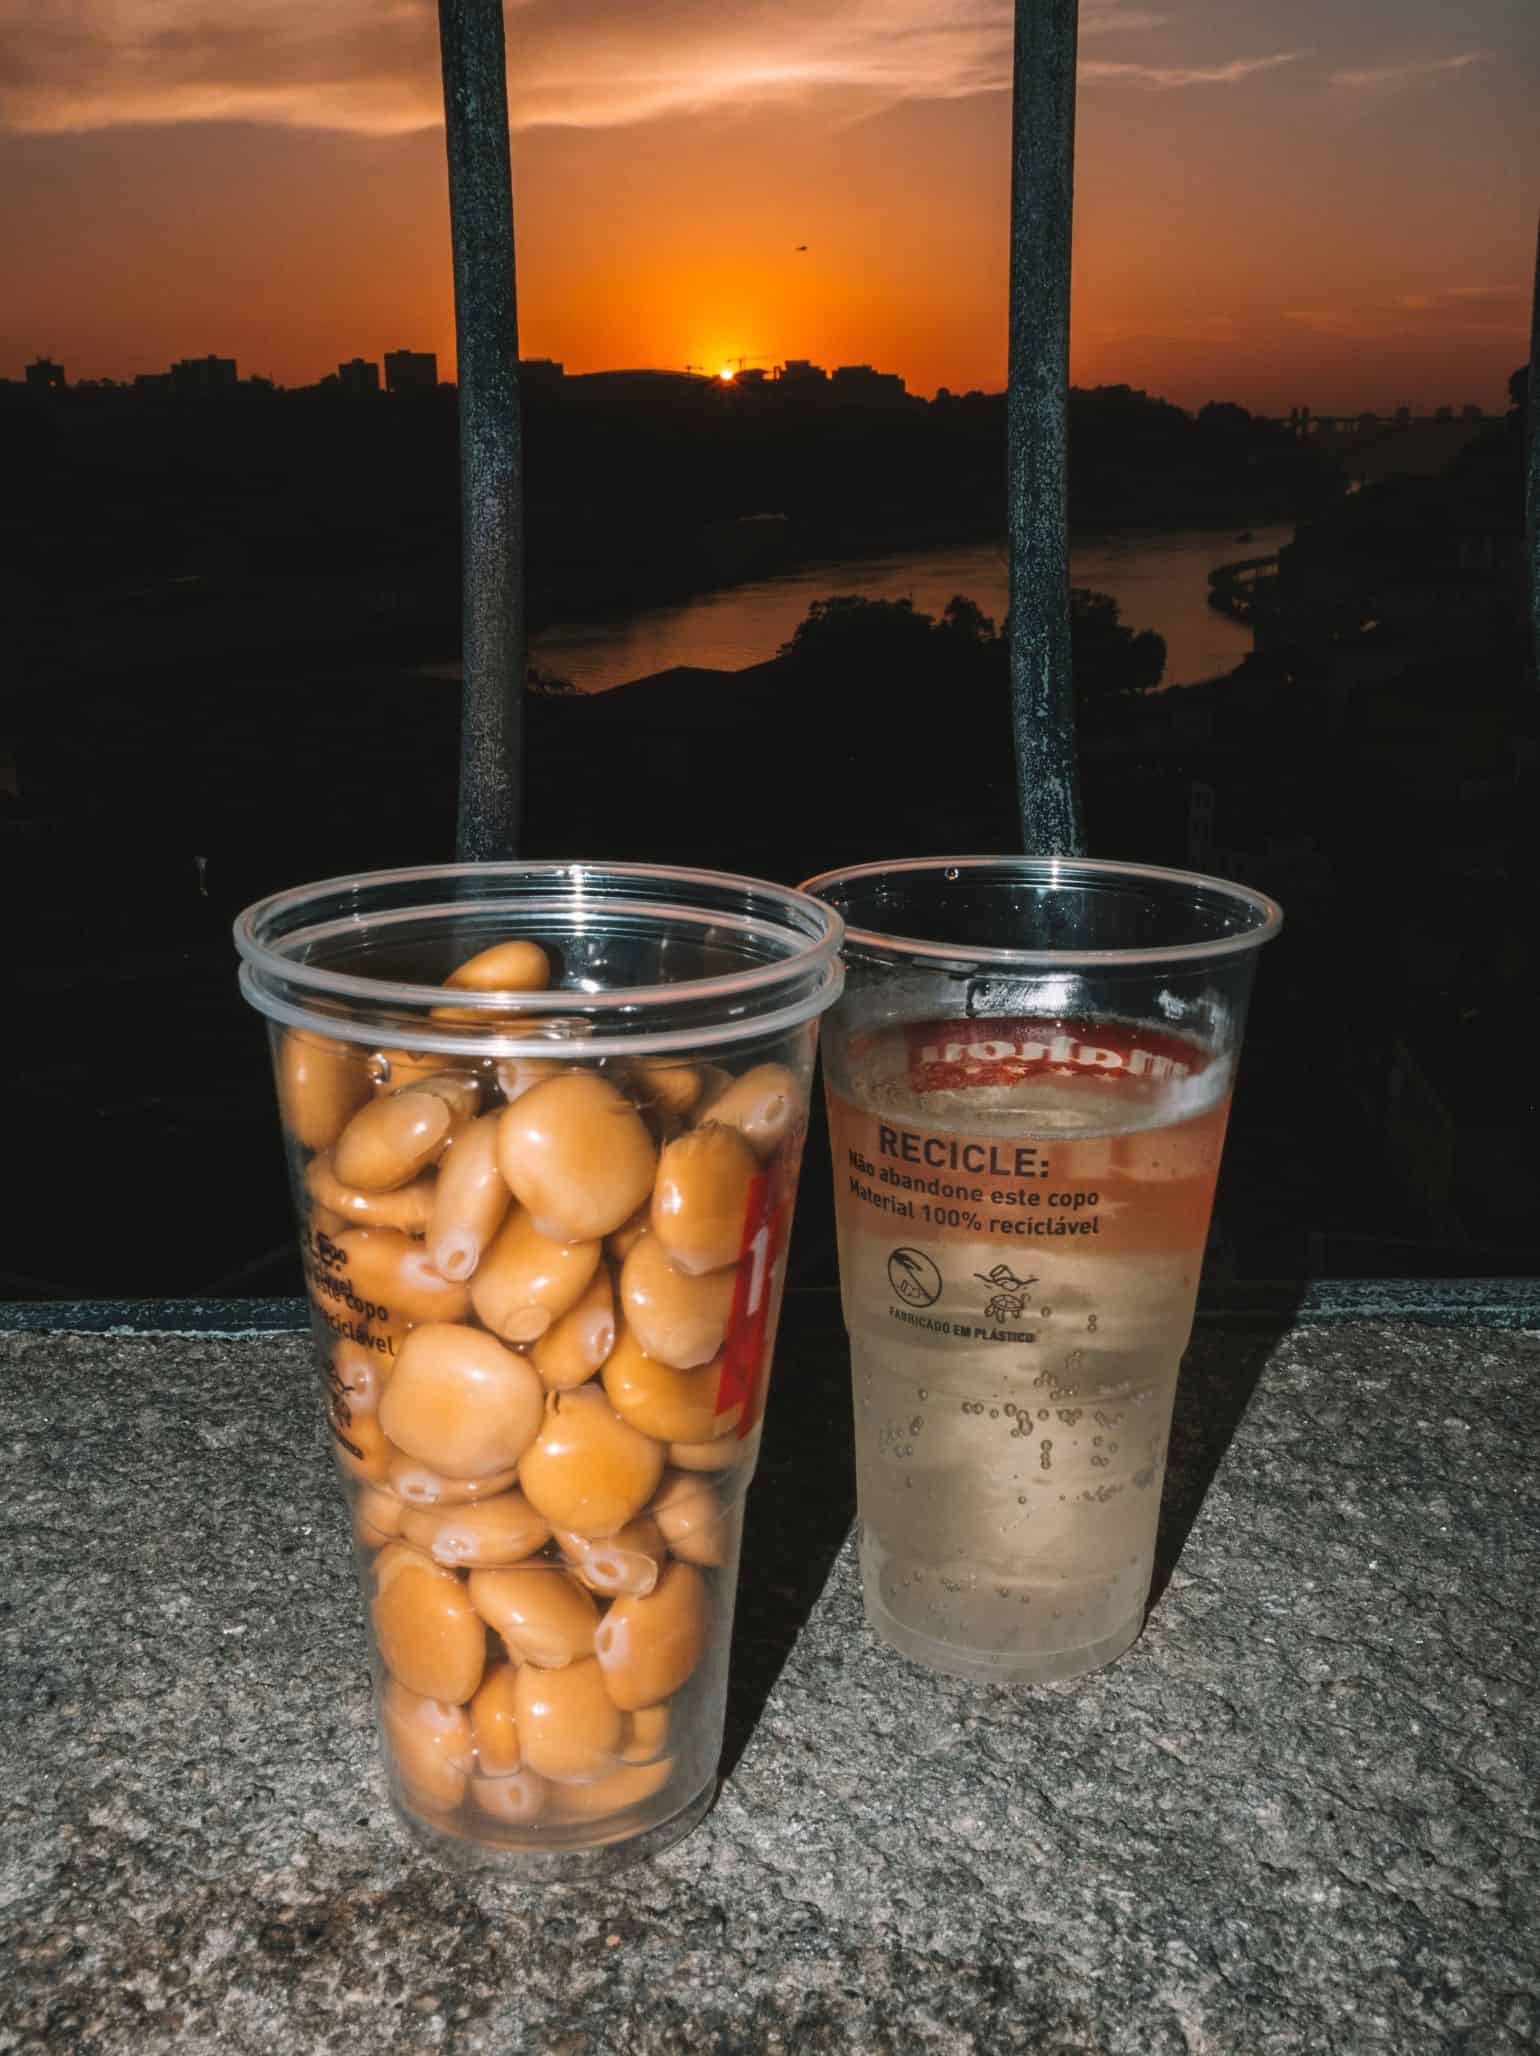 A cup of Lupini Beans enjoyed at sunset during our long weekend in Porto. 